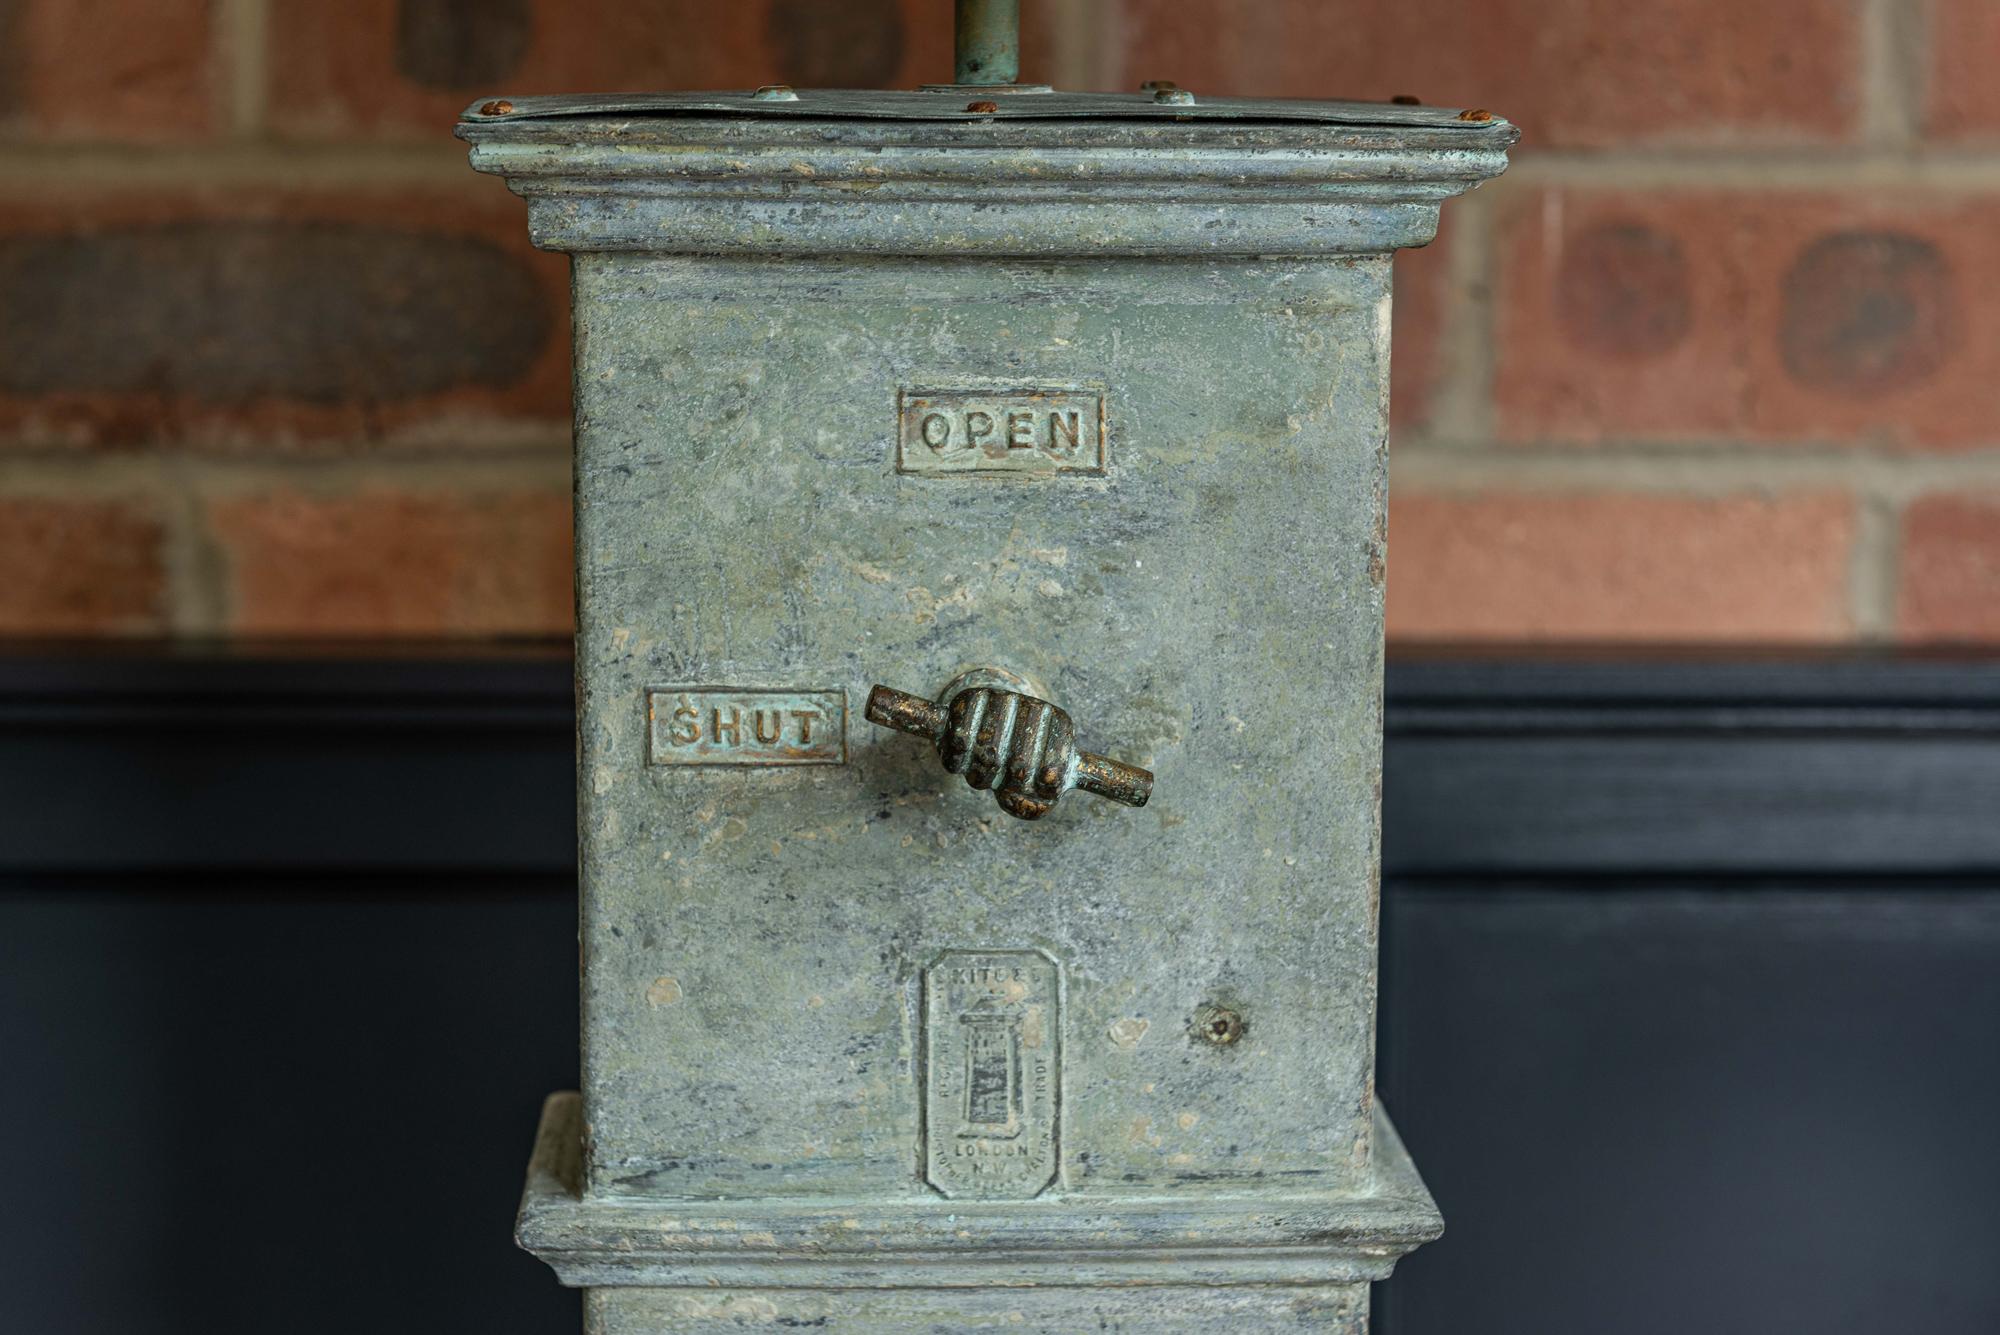 19th century London Makers air vent table lamp,
circa 1880.

Adapted Air Vent table lamp, 'Kite & Co London'. Solid brass hand handle to open the vent open or shut, engineered to turn the lamp on and off accordingly. Comes with an oval linen